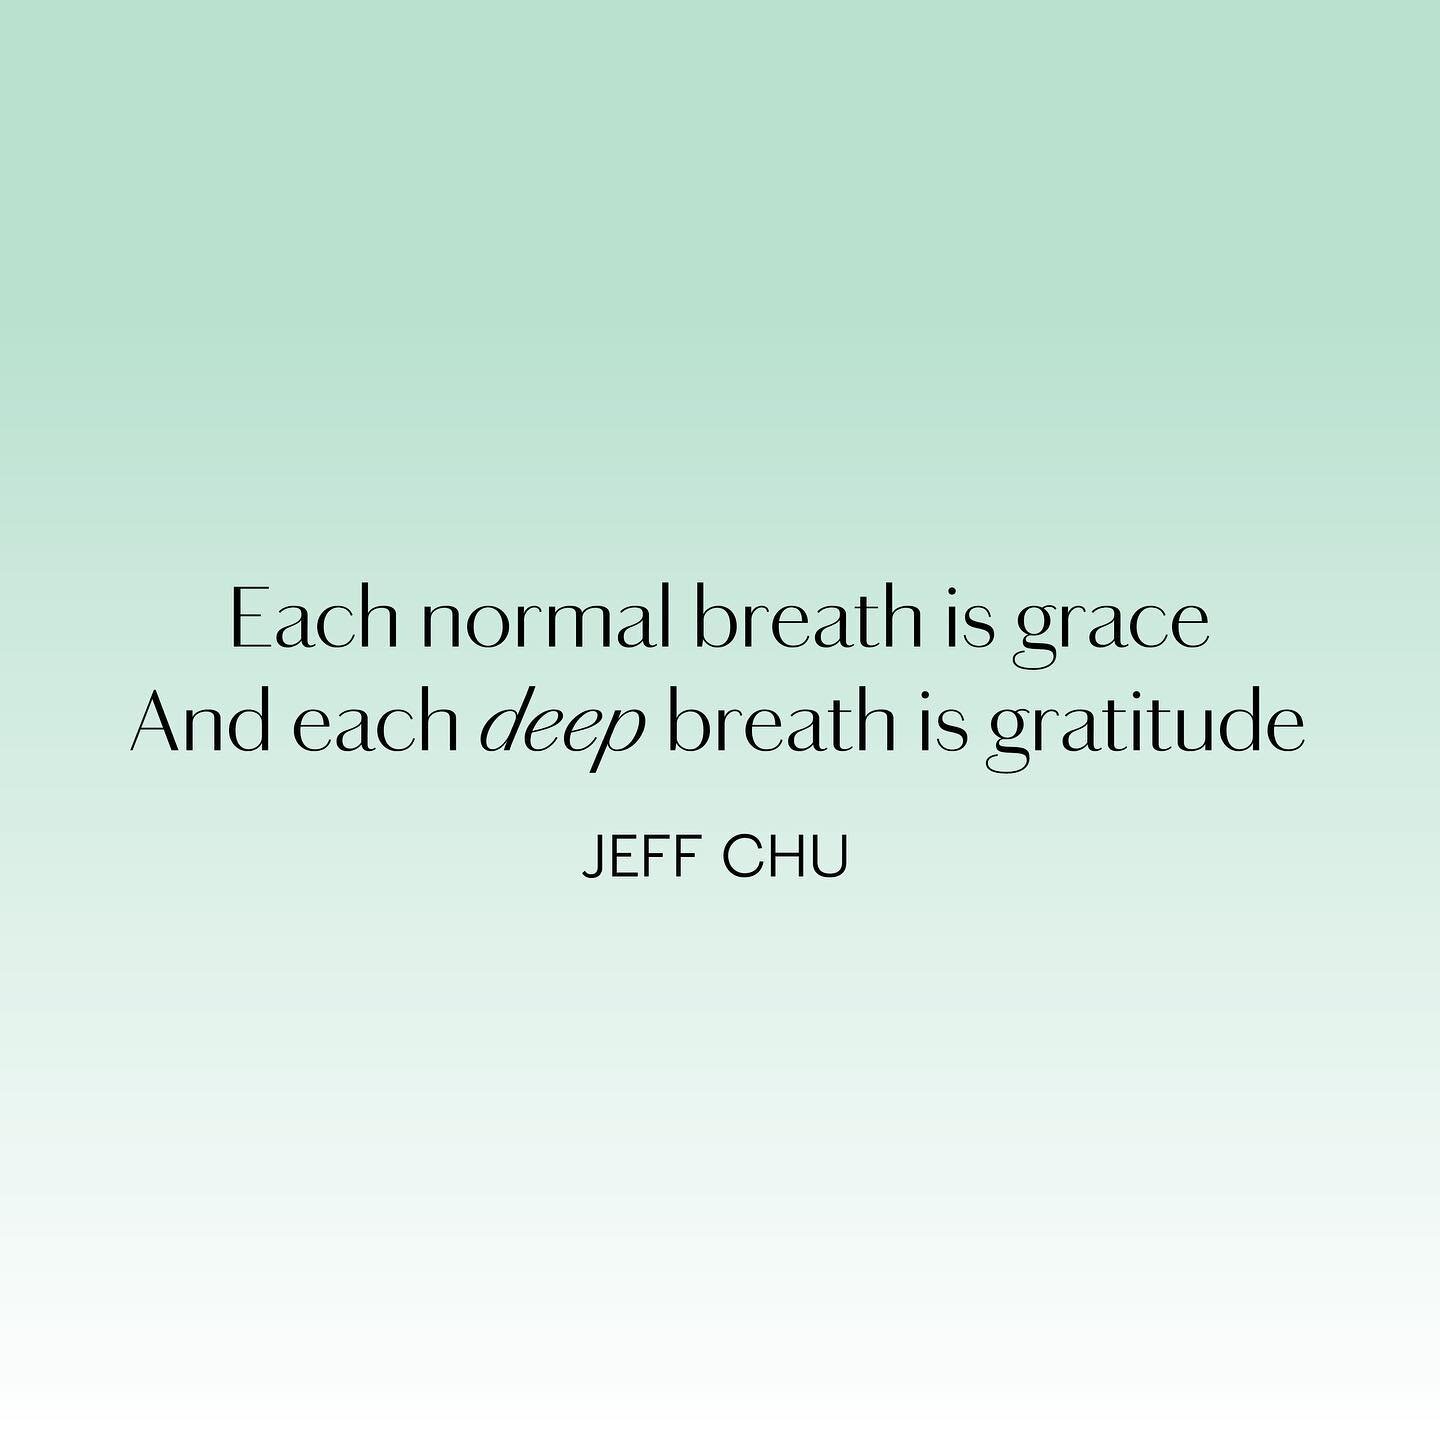 &ldquo;Each normal breath is grace&mdash;20,000 reminders that I get, every single day, of the life I did nothing to deserve, the life that is God&rsquo;s handiwork. And each deep breath is gratitude, a choice to answer the divine invitation into a l